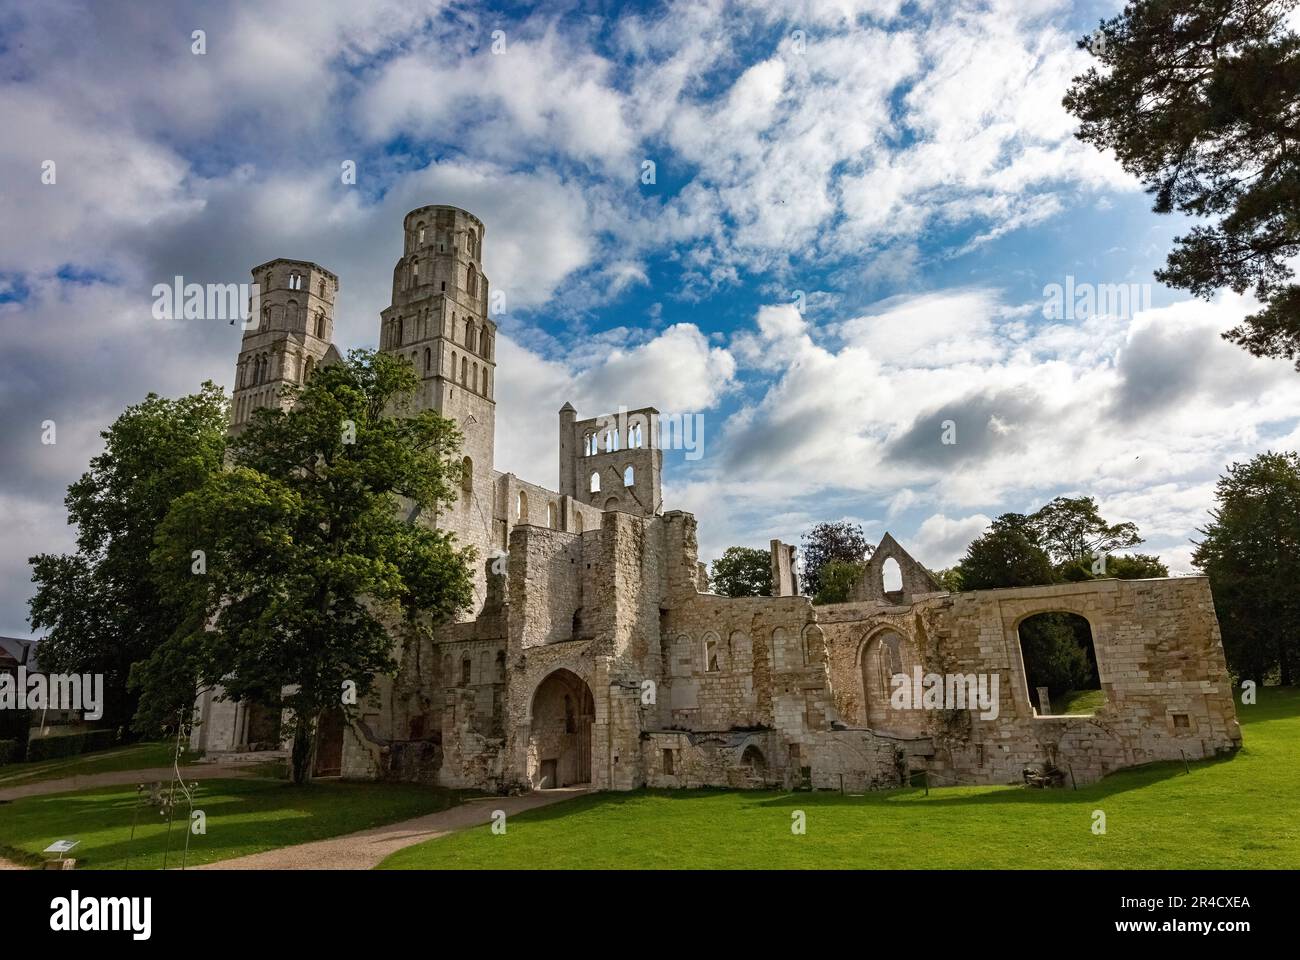 Jumièges Abbey, Normandy, France, Europe Stock Photo